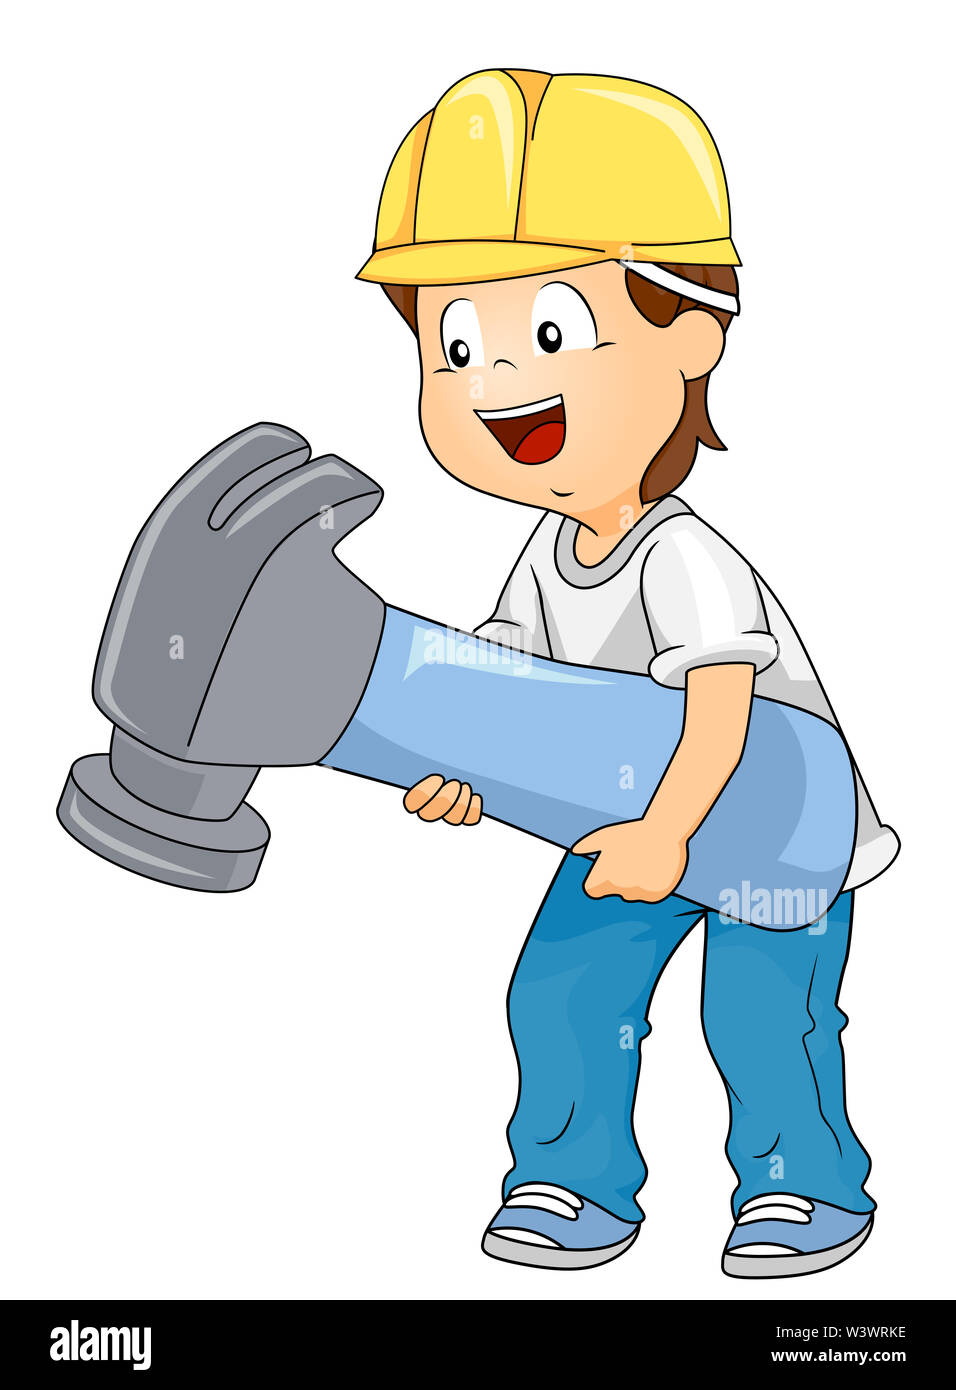 Illustration of a Kid Boy Wearing Yellow Construction Hat and Holding a Big  Toy Hammer Stock Photo - Alamy